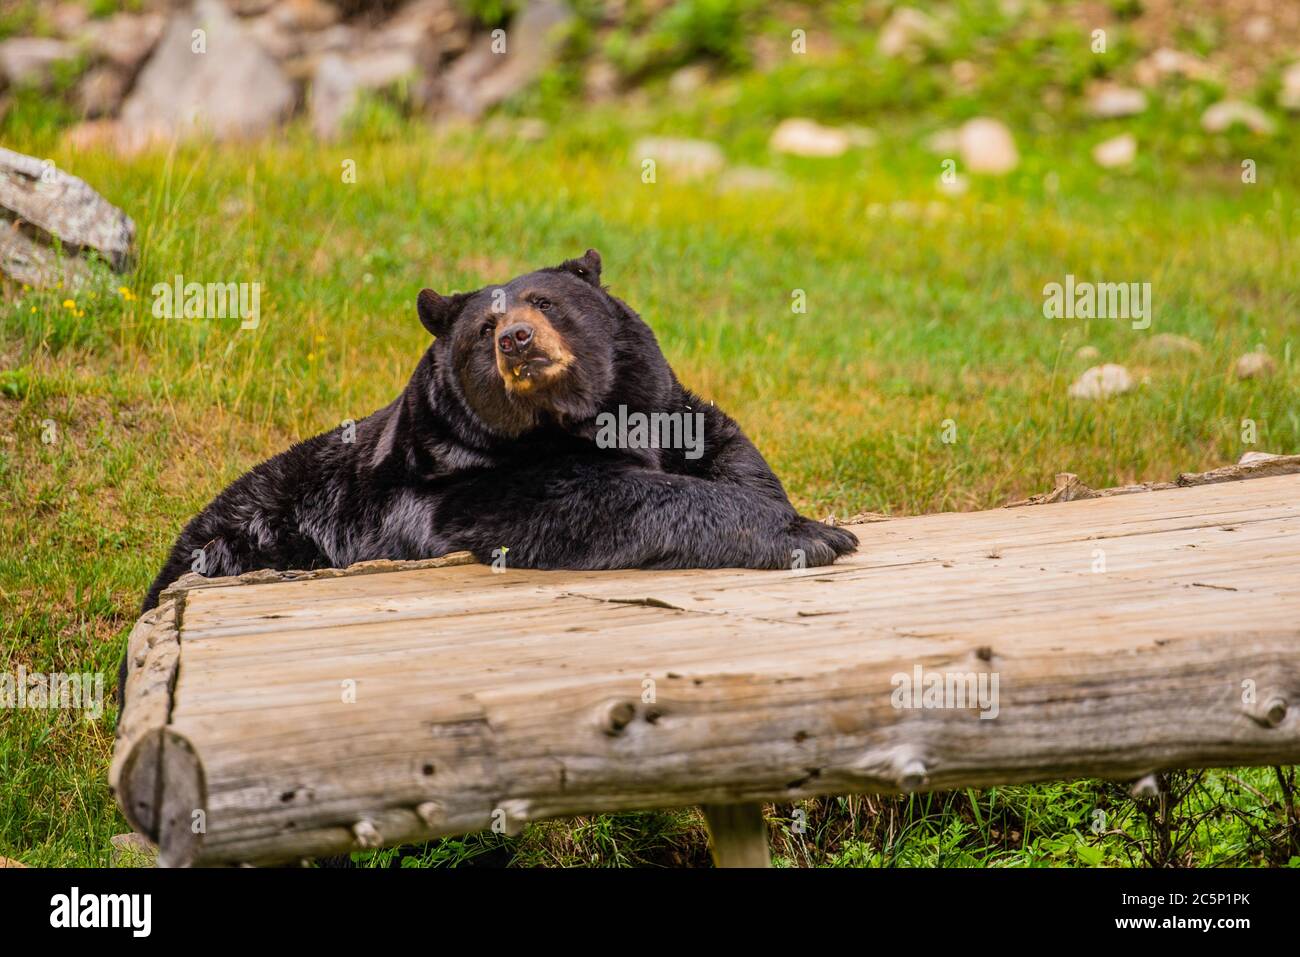 Parc Omega, Canada - July 3 2020: Black bear in the Omega Park in Canada Stock Photo